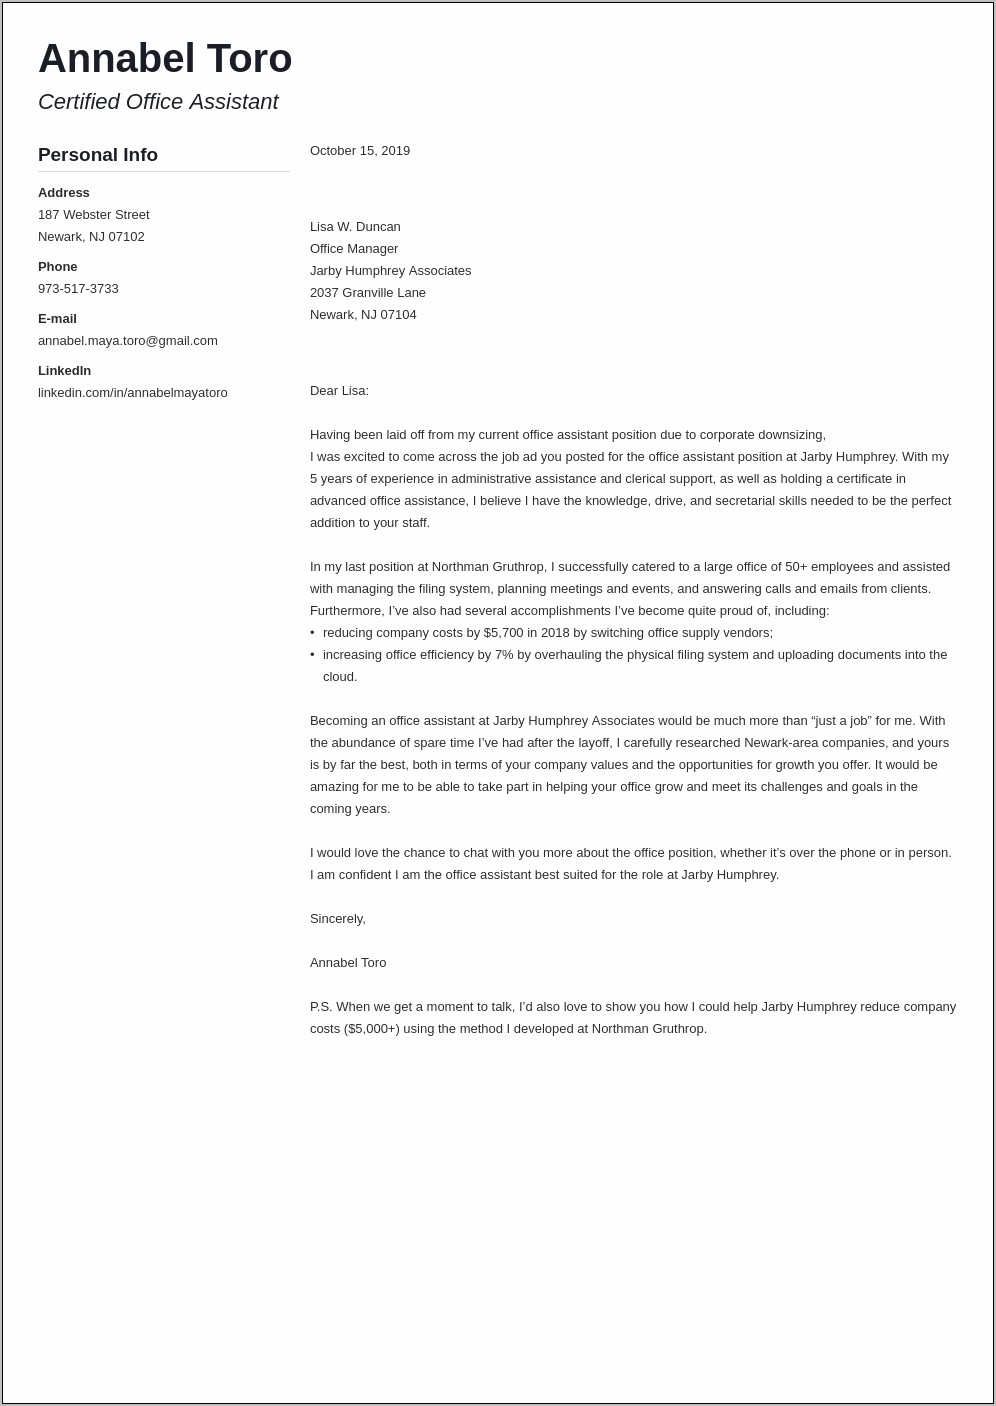 Resume And Cover Letter Holding Case